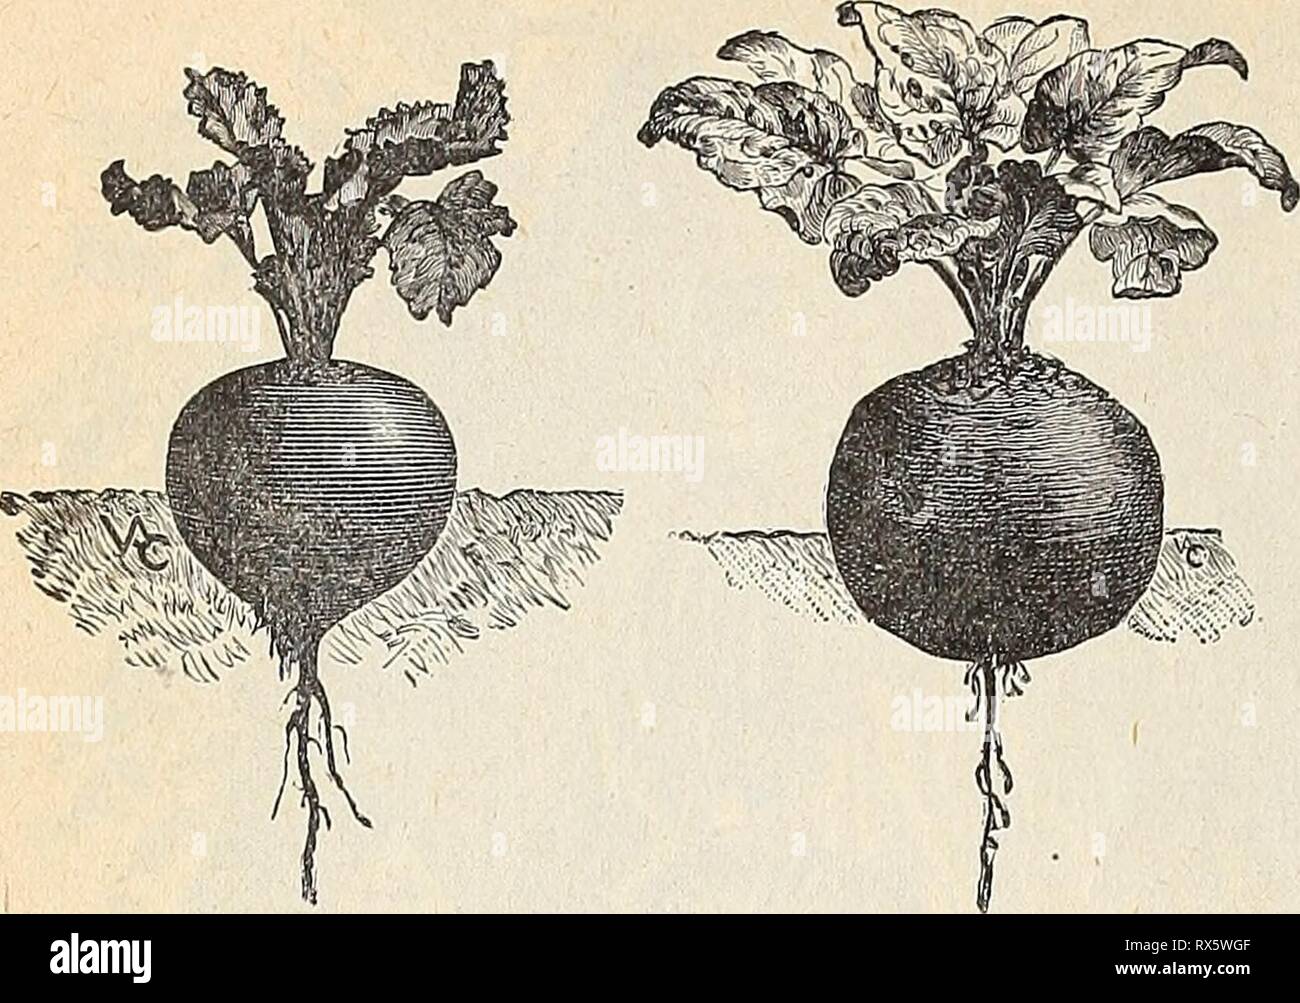 E H Hunt  seedsman E. H. Hunt : seedsman ehhuntseedsman1894hunt Year: 1894  28 E. H. HUNT, ISEED^SMAN, CHICAGO, ILLINOIS.   The soil which is best suited for the culture of the beet is that which is rather light, provided that it is thoroughly enriched with manure. For an early sup- ply sow in spring, as soon as the ground becomes fit to work, in drills about one foot apartand two inches deep. Sow again in May for main crop and in June for winter use. Whefl plants have attained three or four leaves,thin out, so that they may stand eight or nine inches apart. One ounce to JO feet of drill; j to Stock Photo